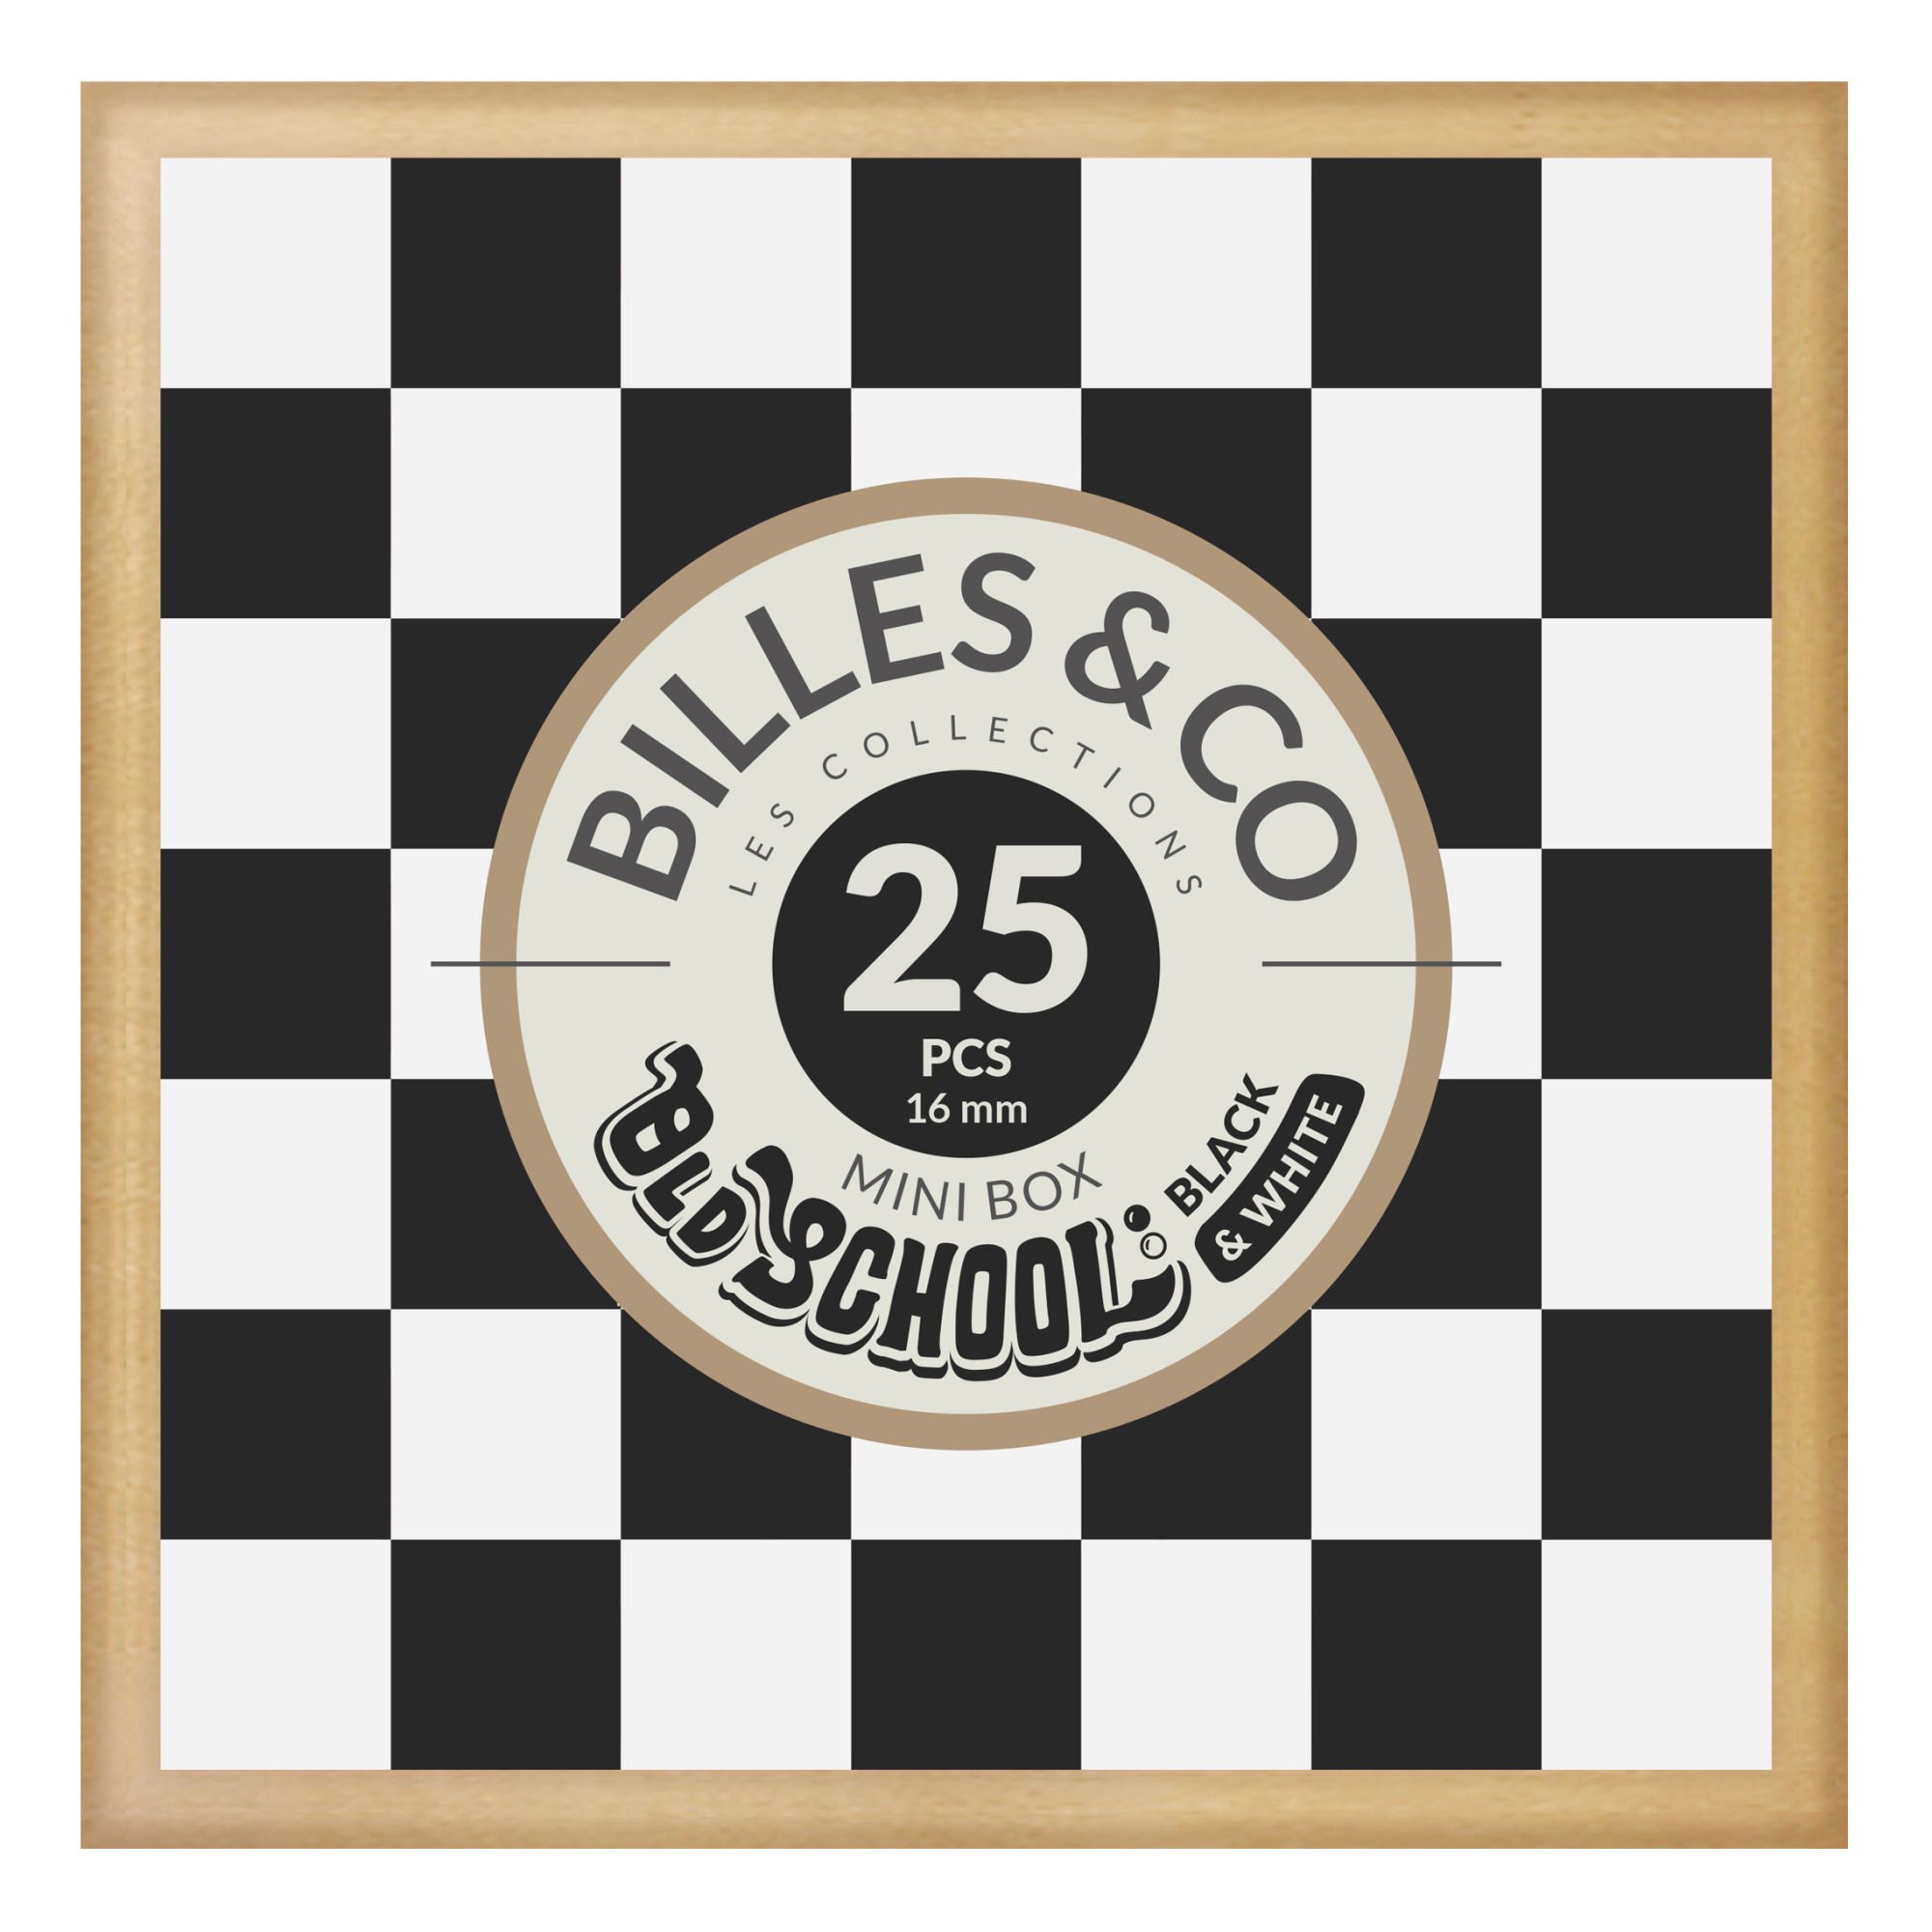 Billes & Co I Nouvelle collection I Smallable